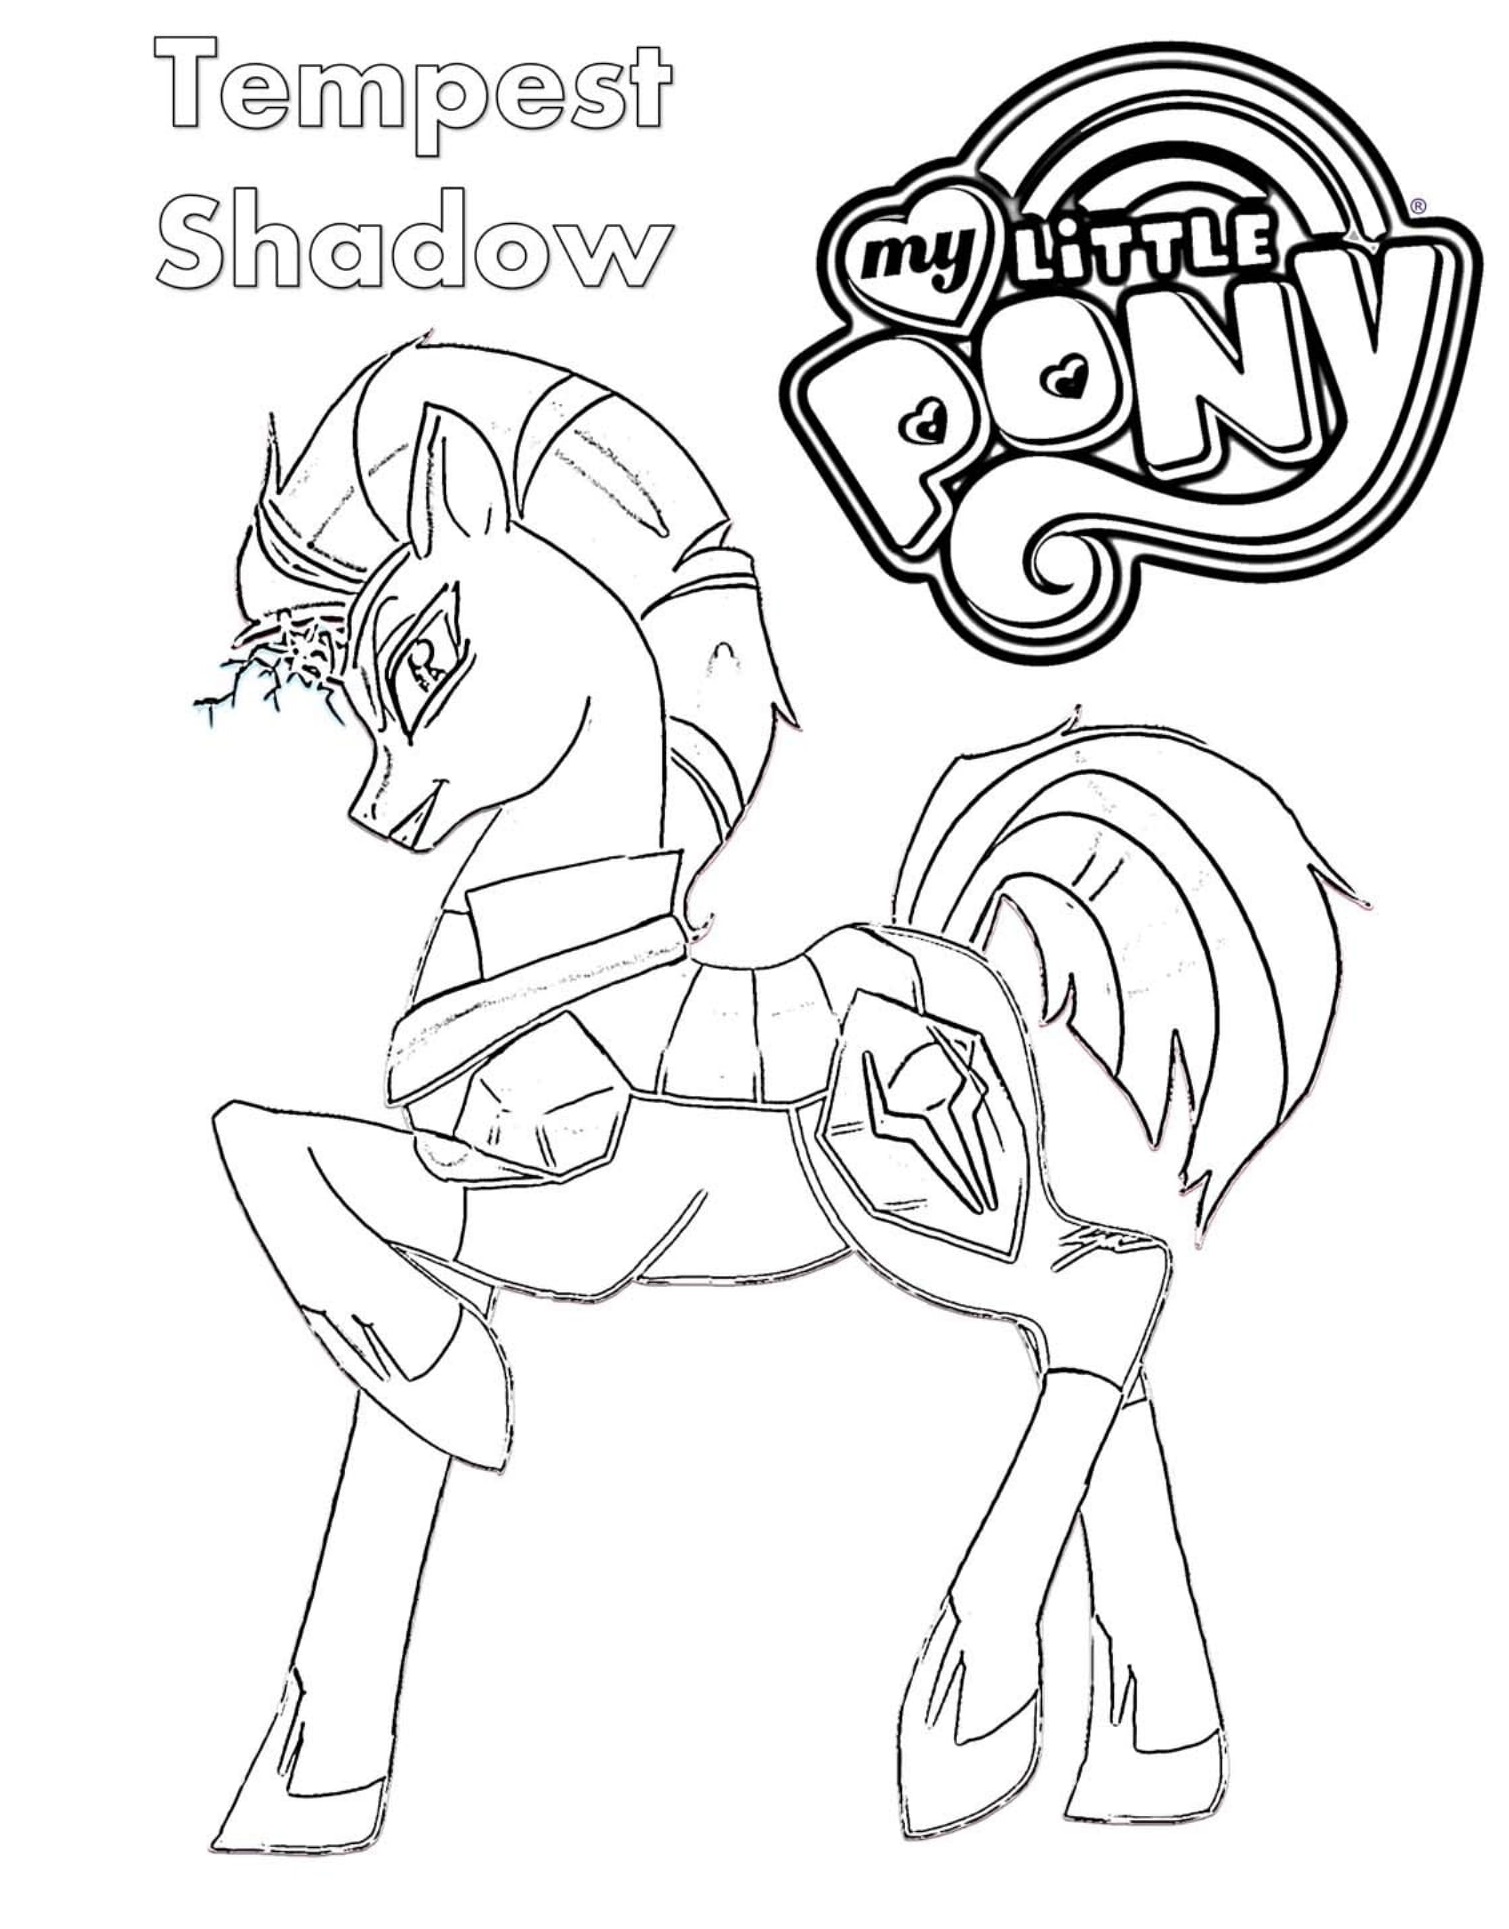 Tempest Shadow My Little Pony Coloring Page